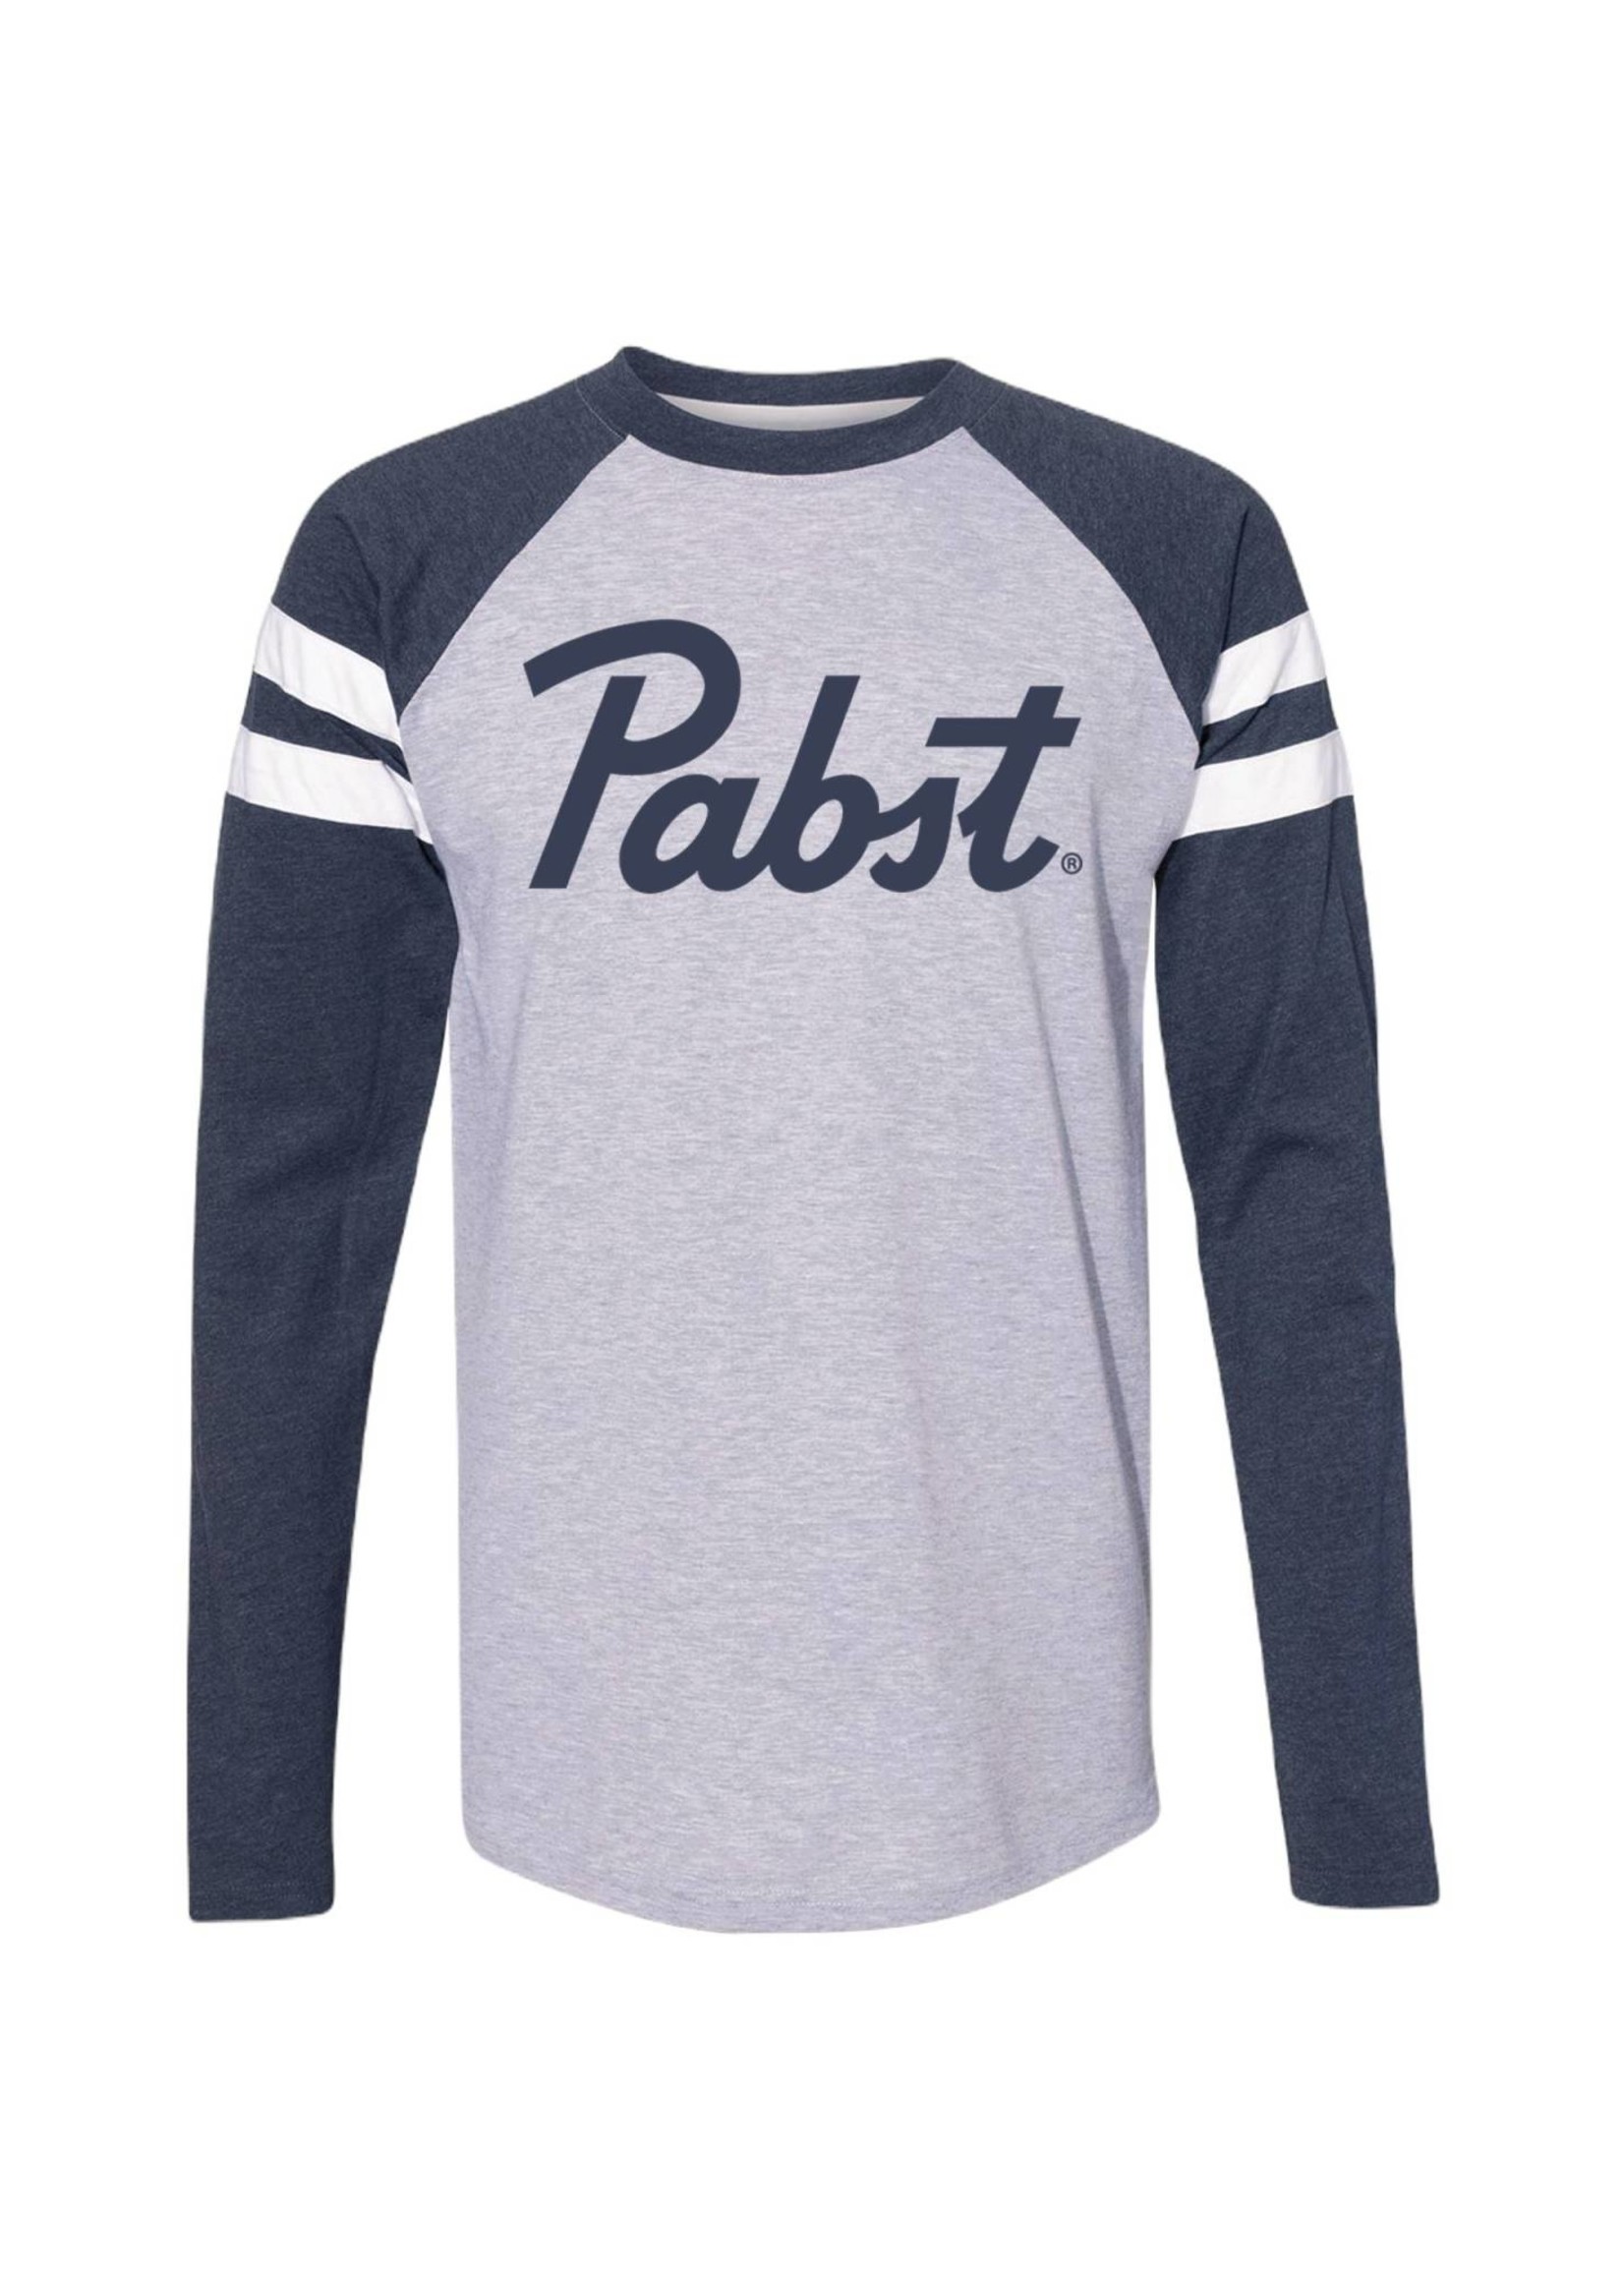 Pabst Pabst Script Game Day Long Sleeve